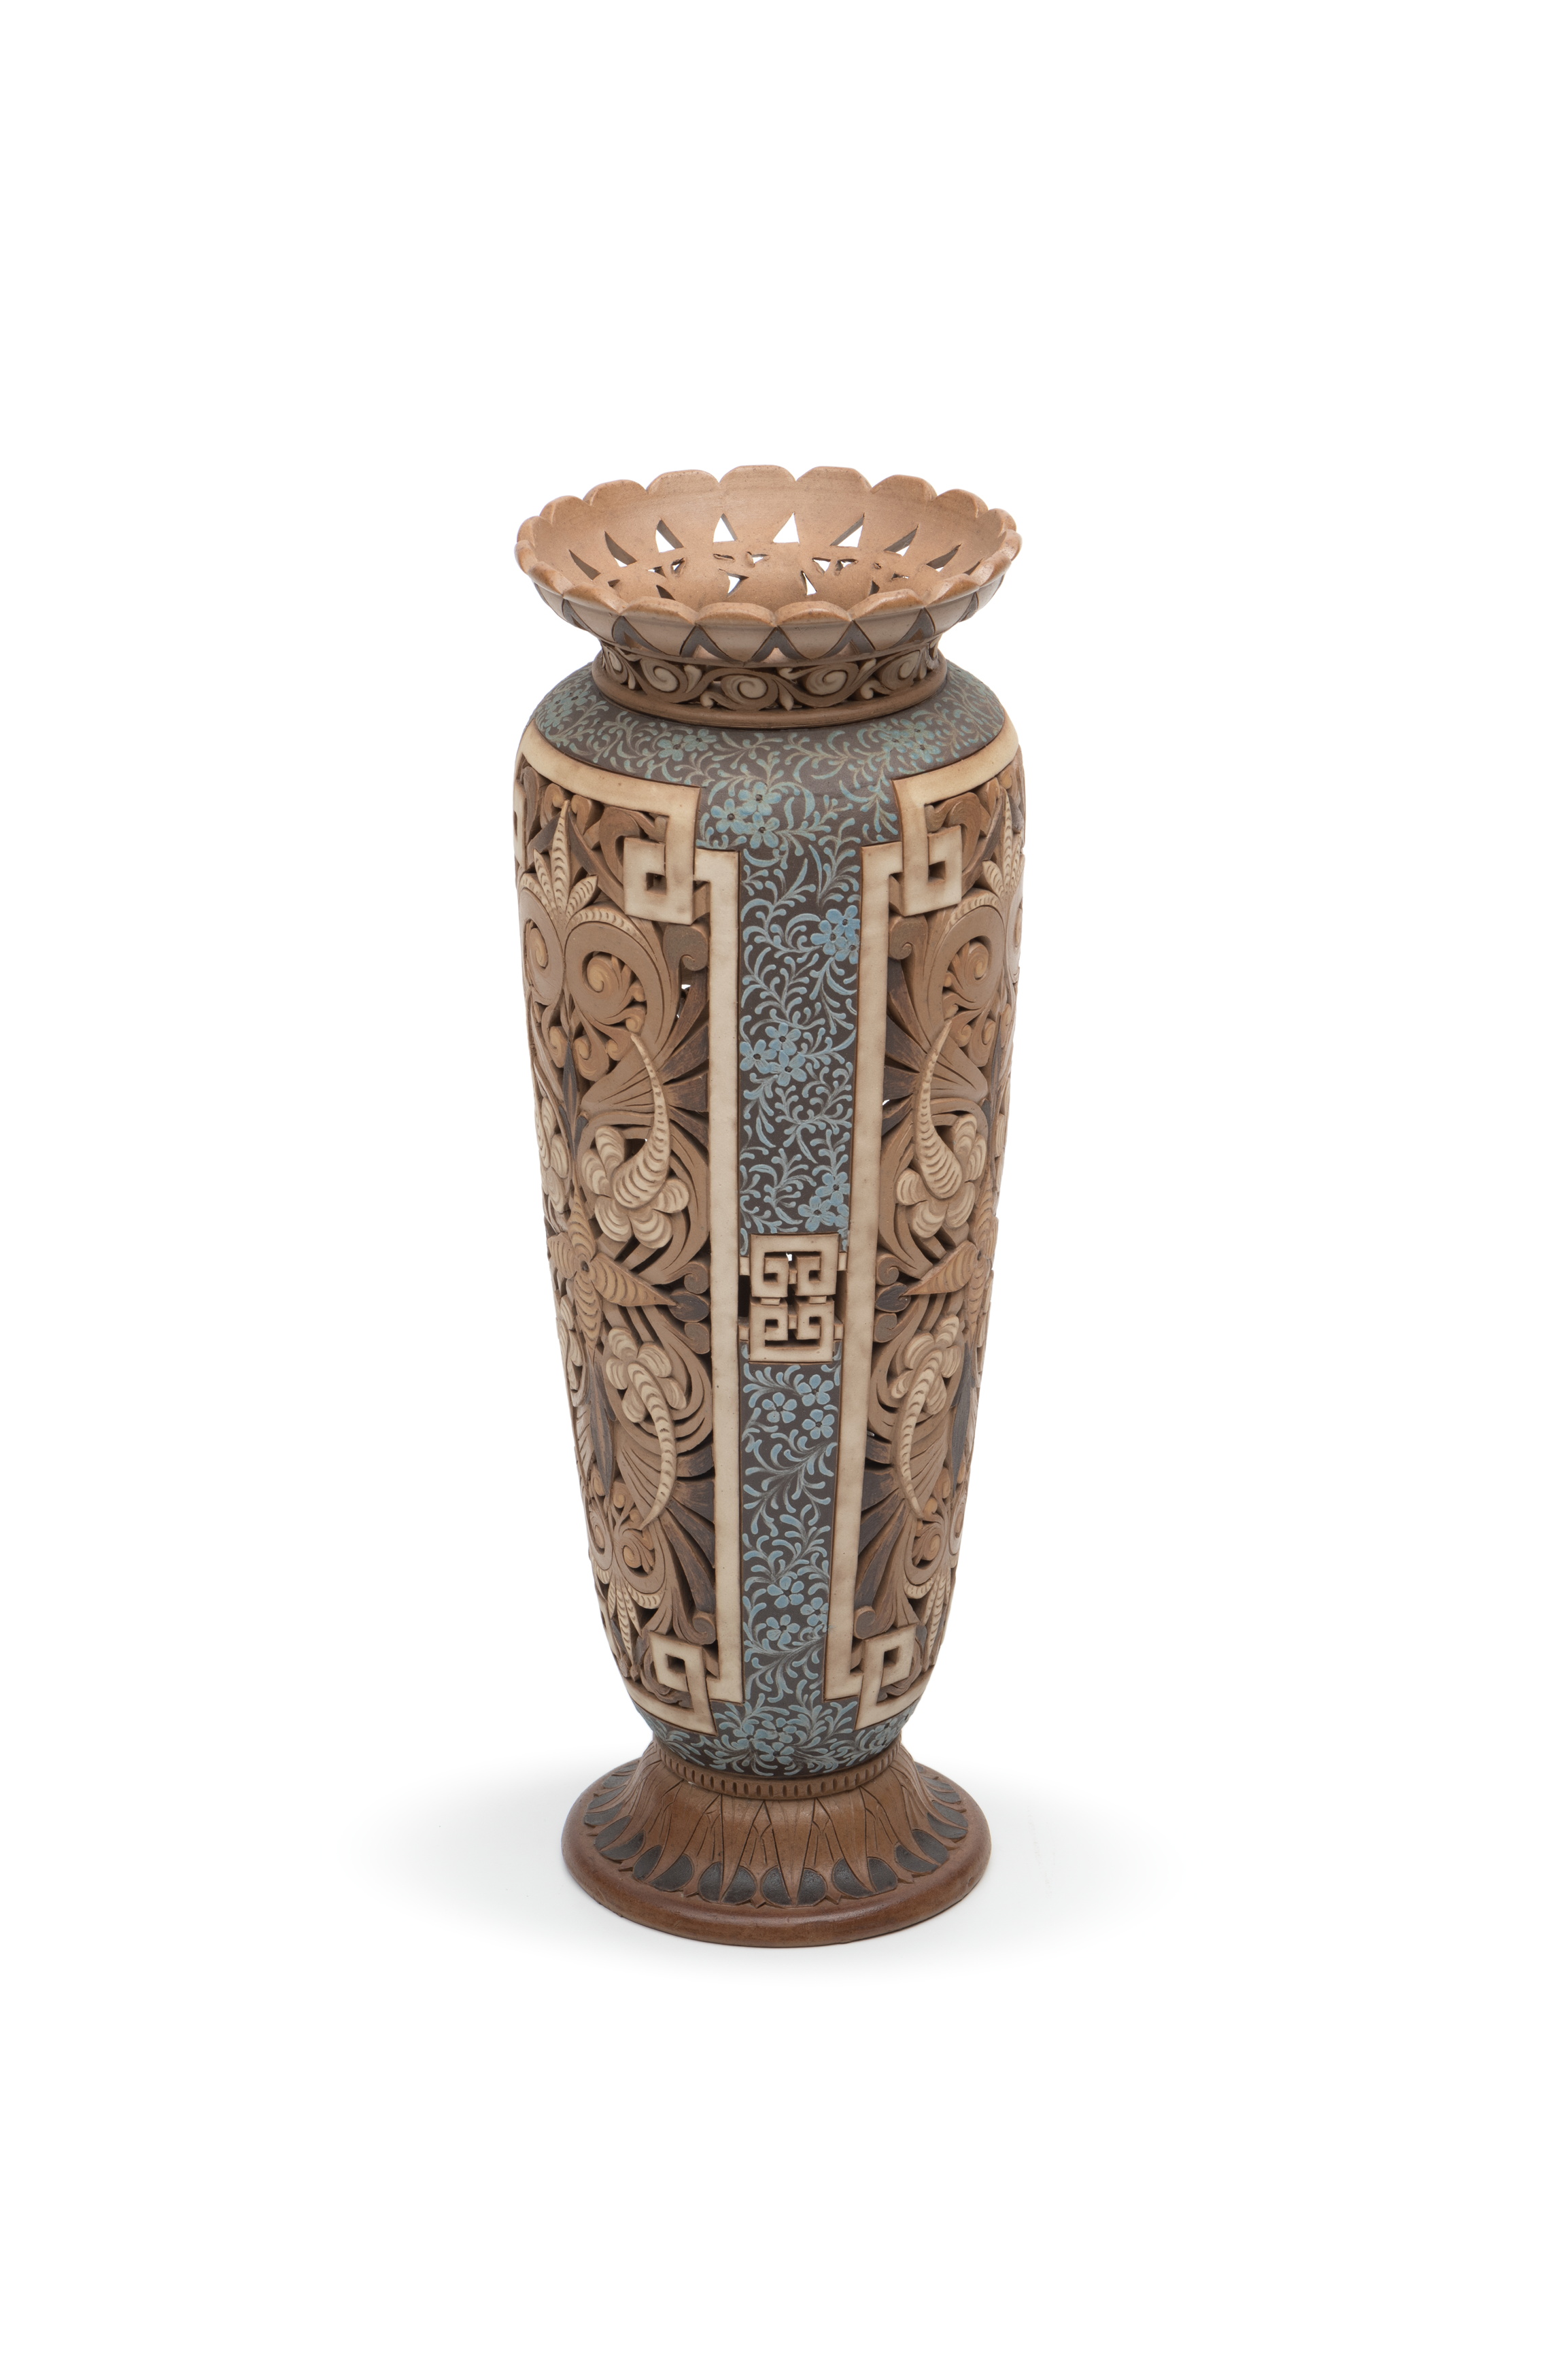 Vase by Doulton decorated by Rosetta Hazeldine and Edith Lupton